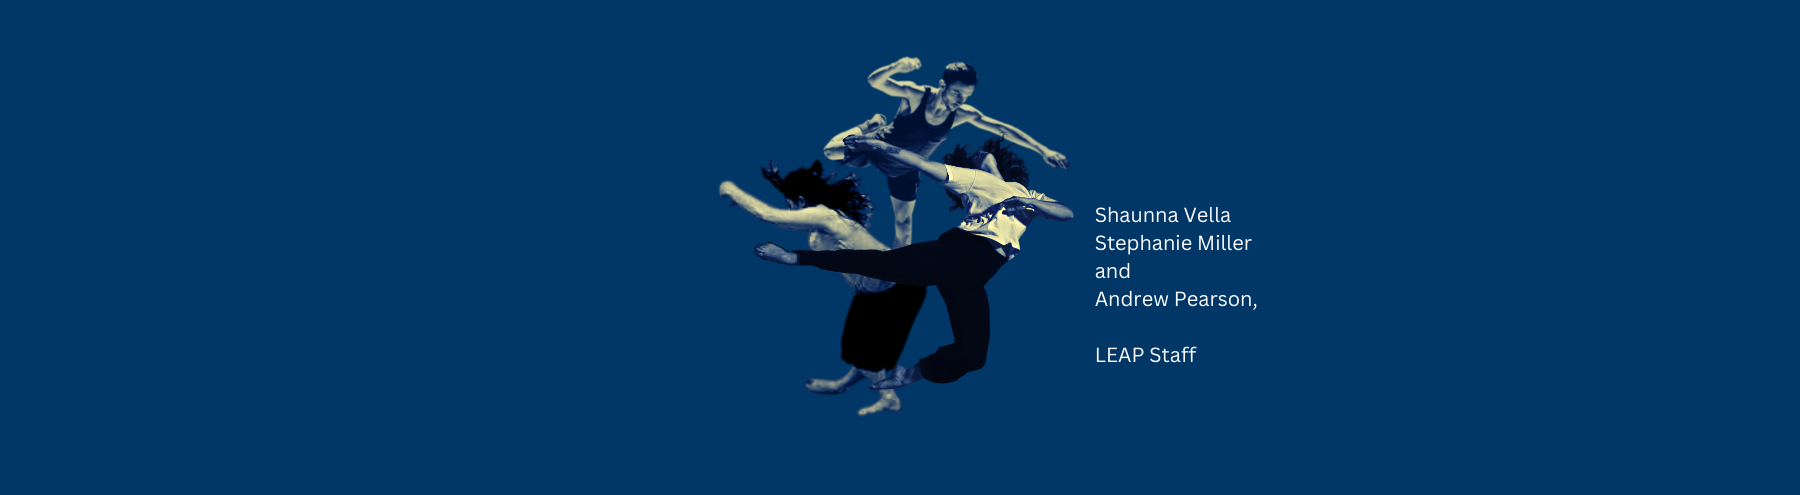 Connect With LEAP Staff